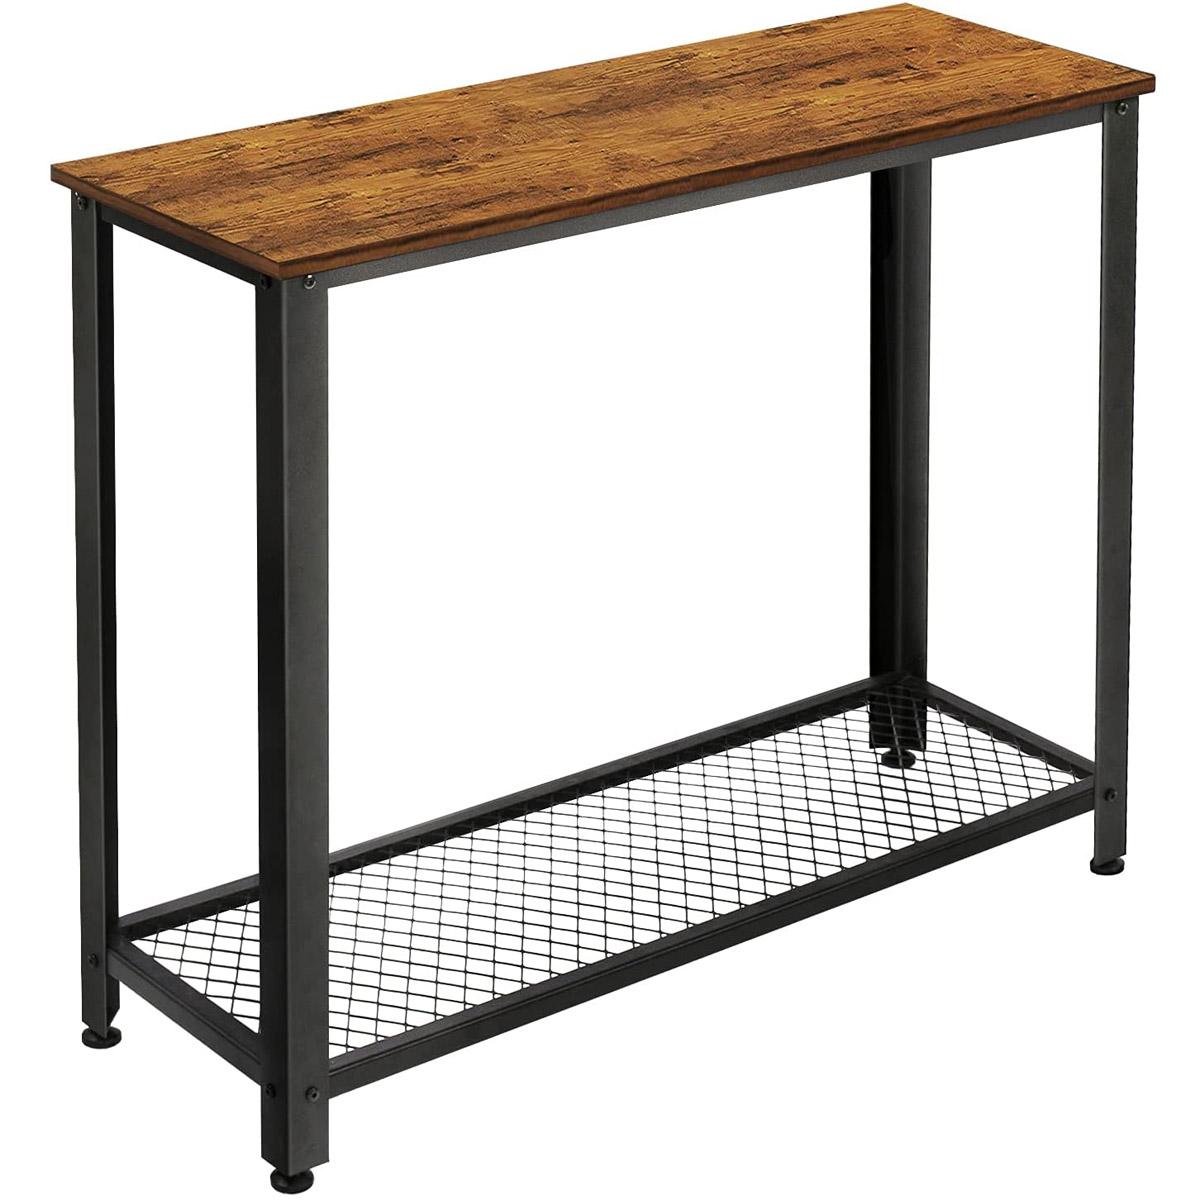 KingSo Industrial Console Table with Shelf for $44.09 Shipped